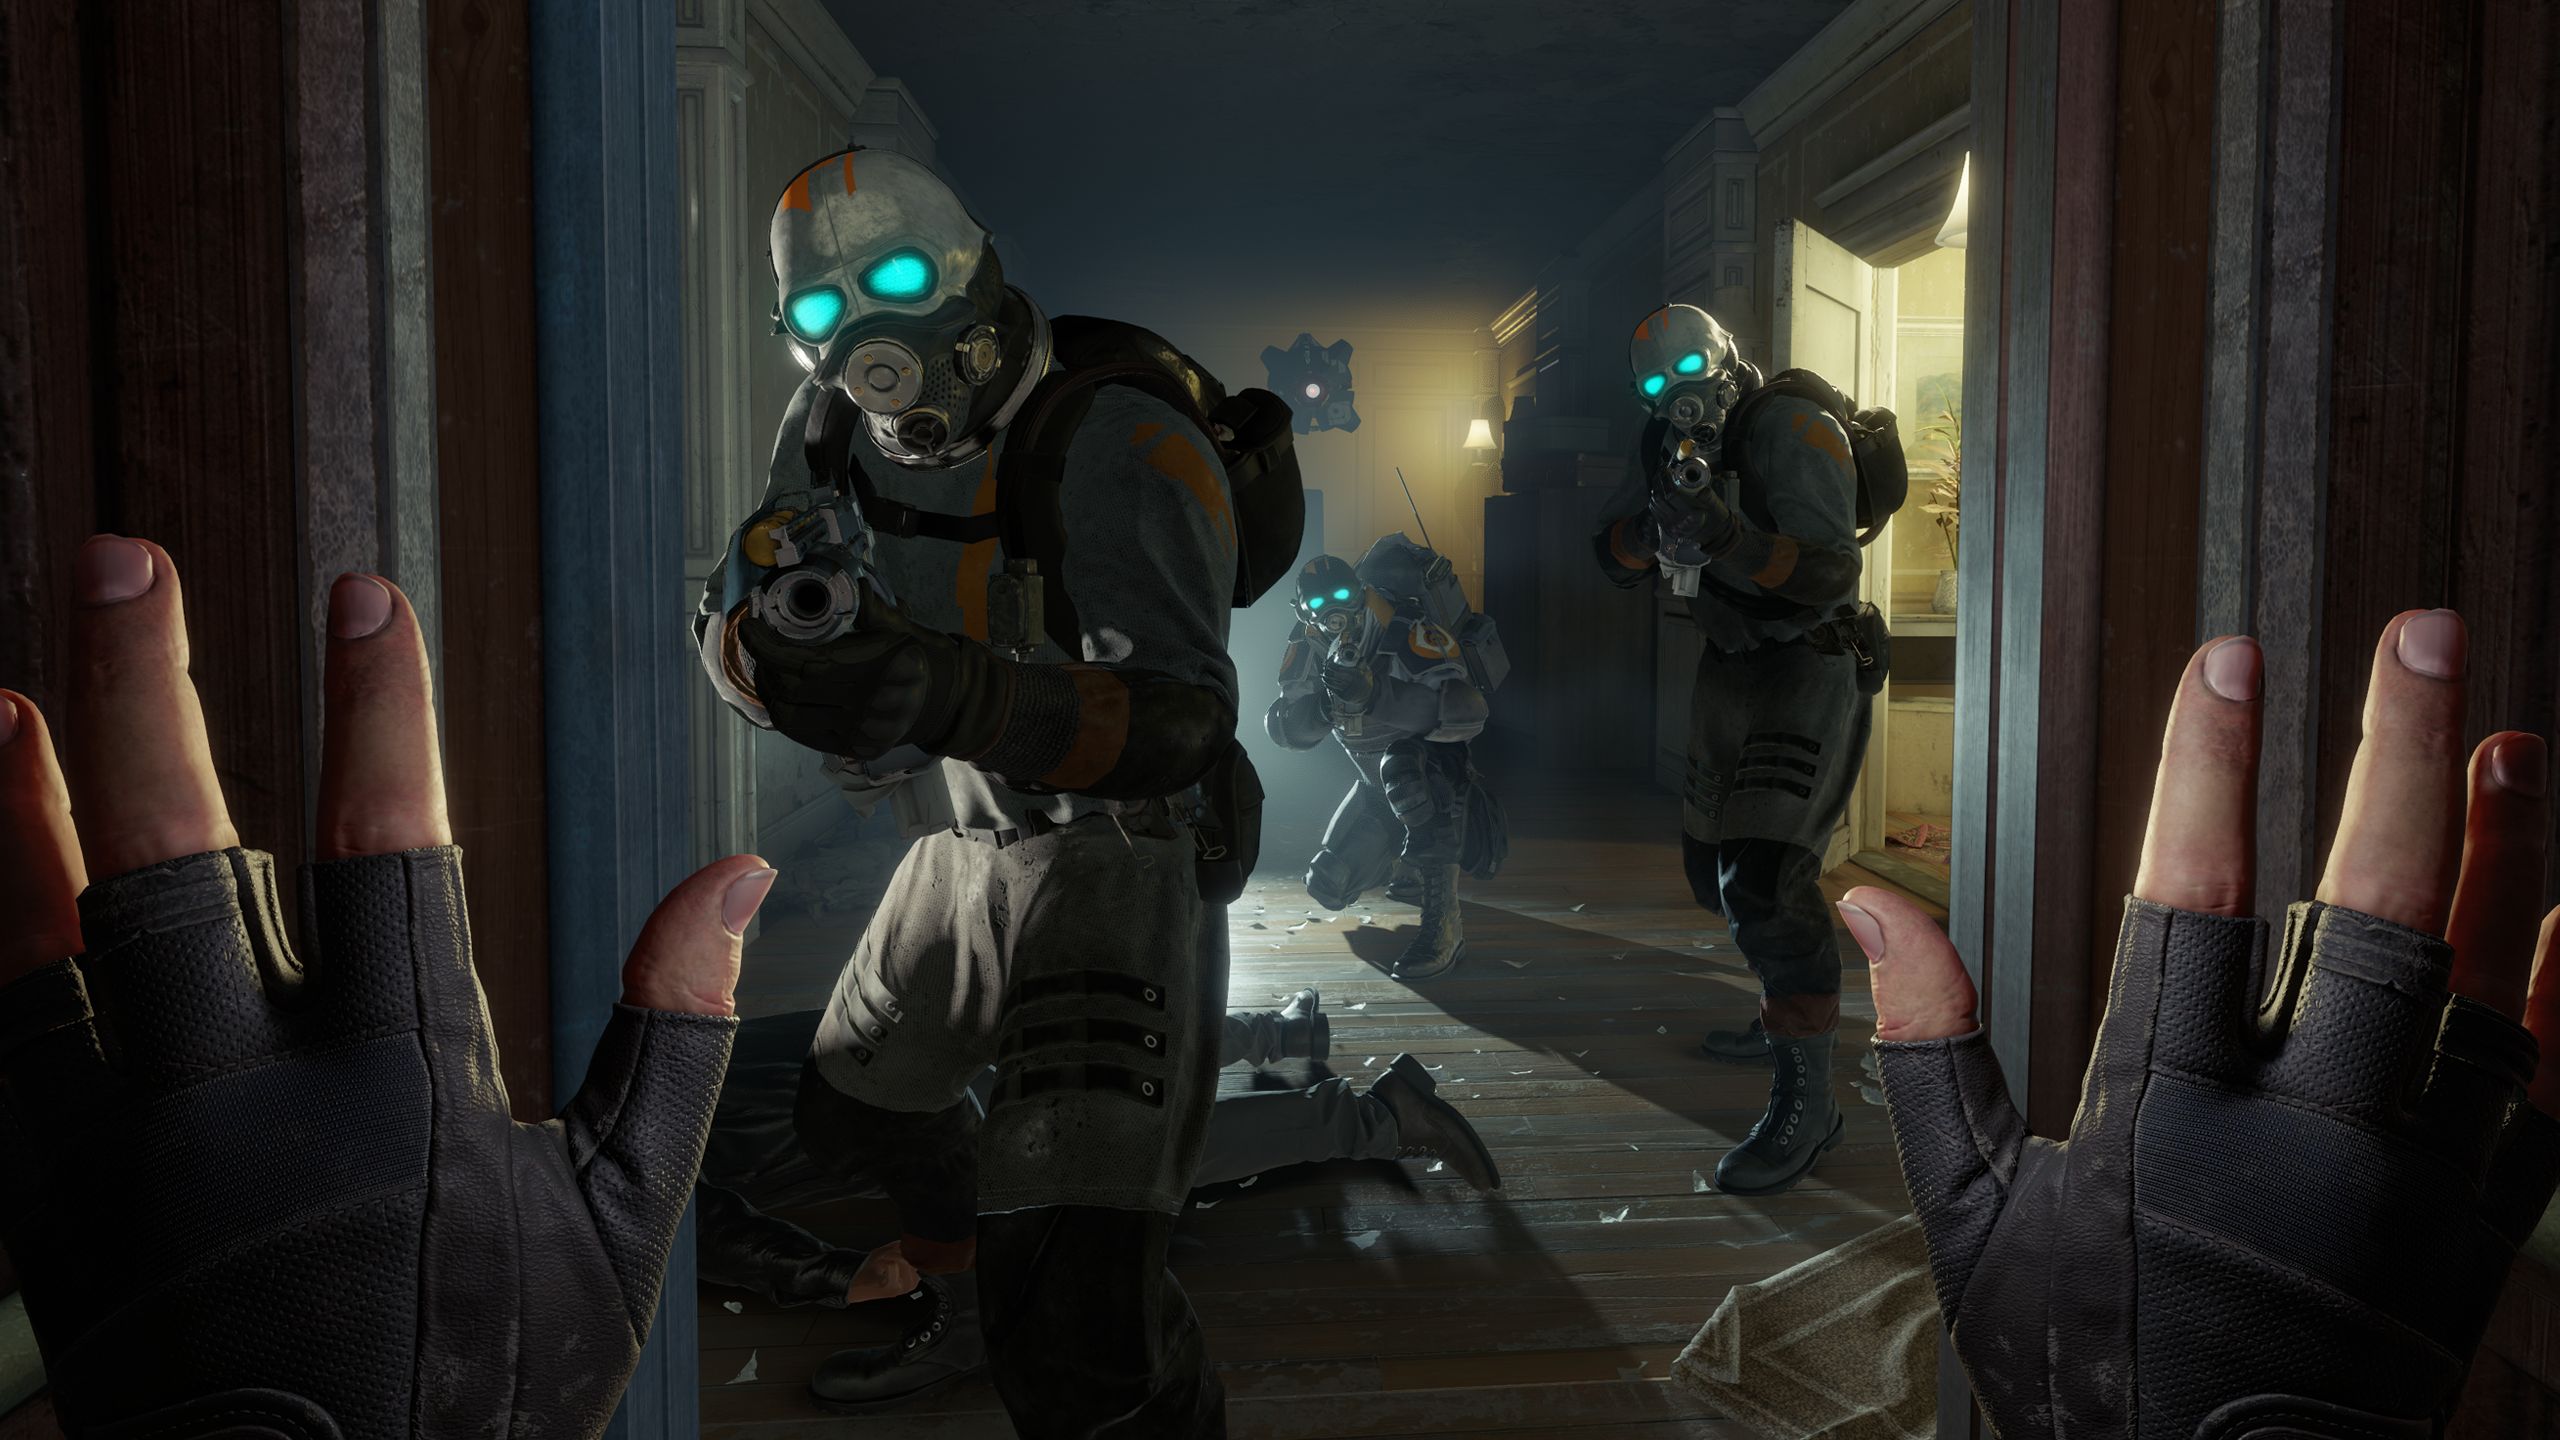 First-person look at masked enemies pointing guns and a set of hands raised in surrender.